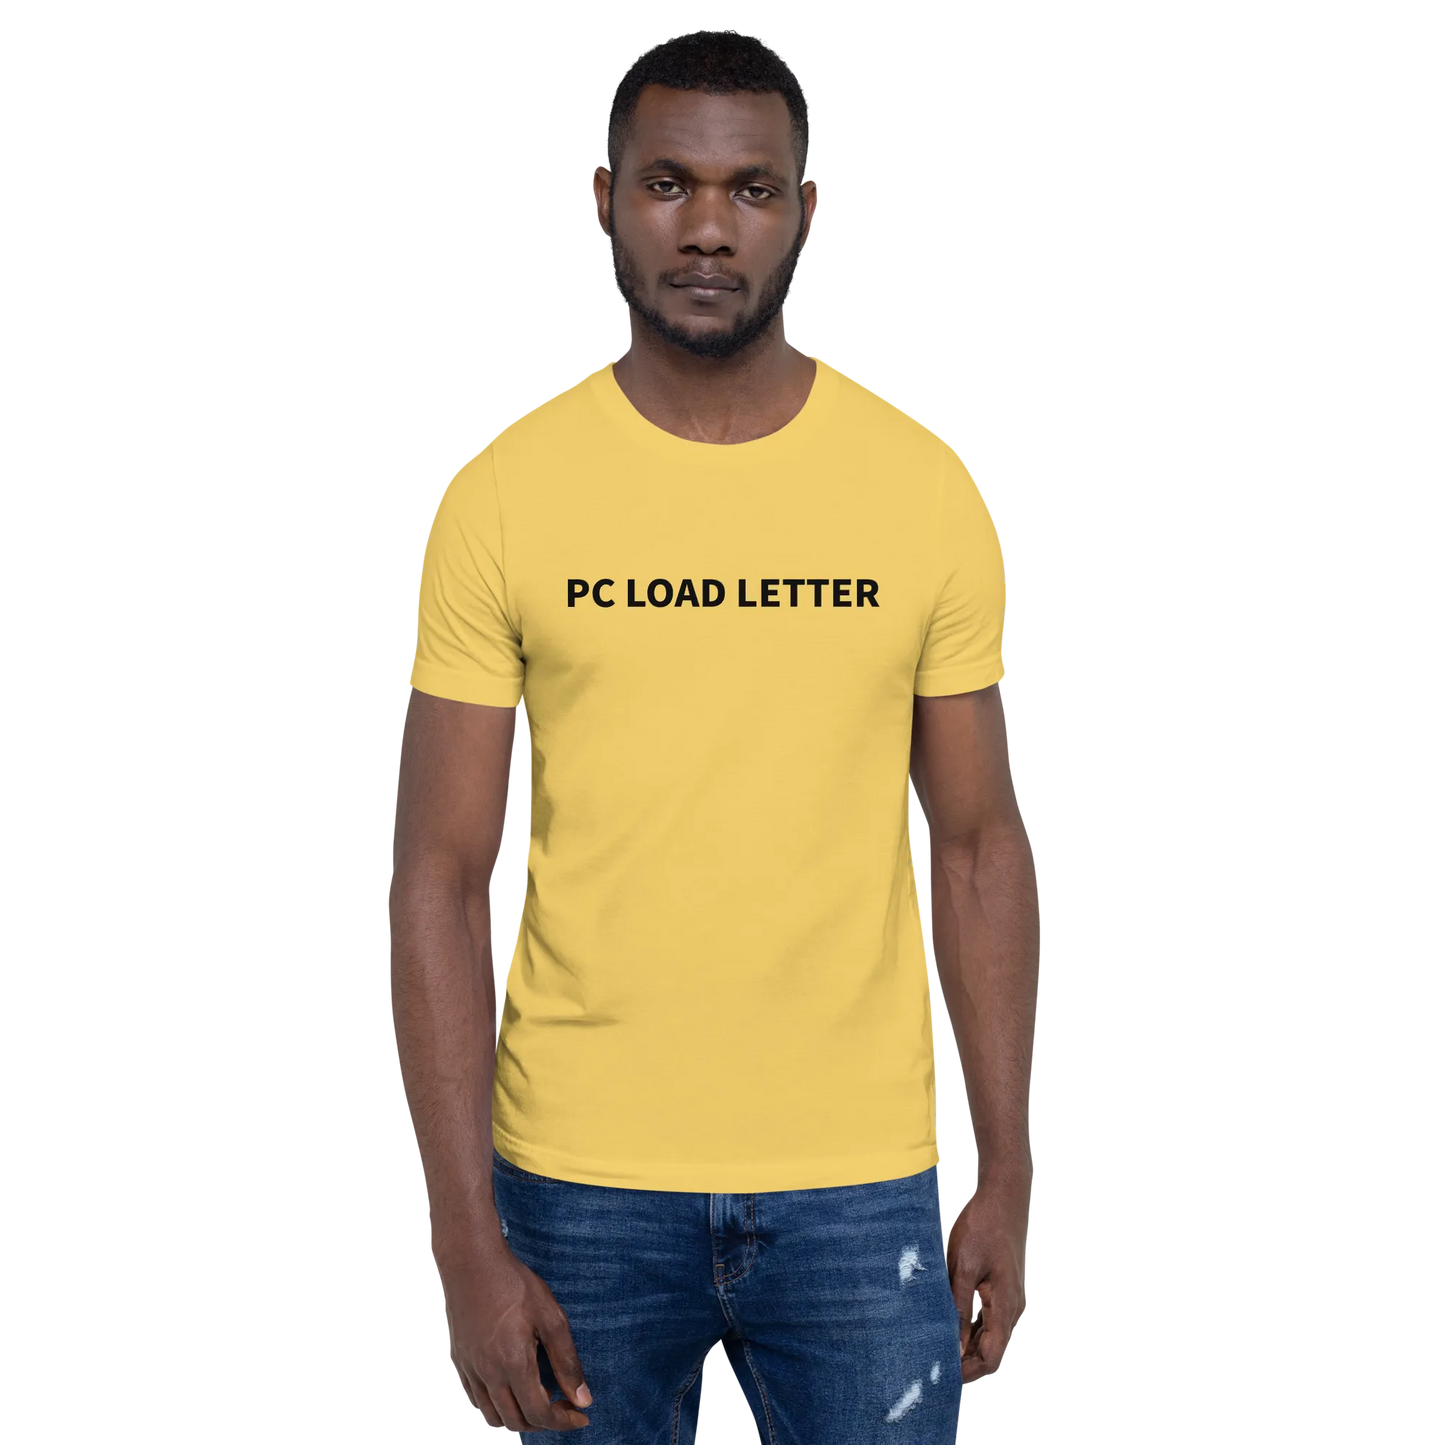 PC Load Letter Tee in Yellow on man